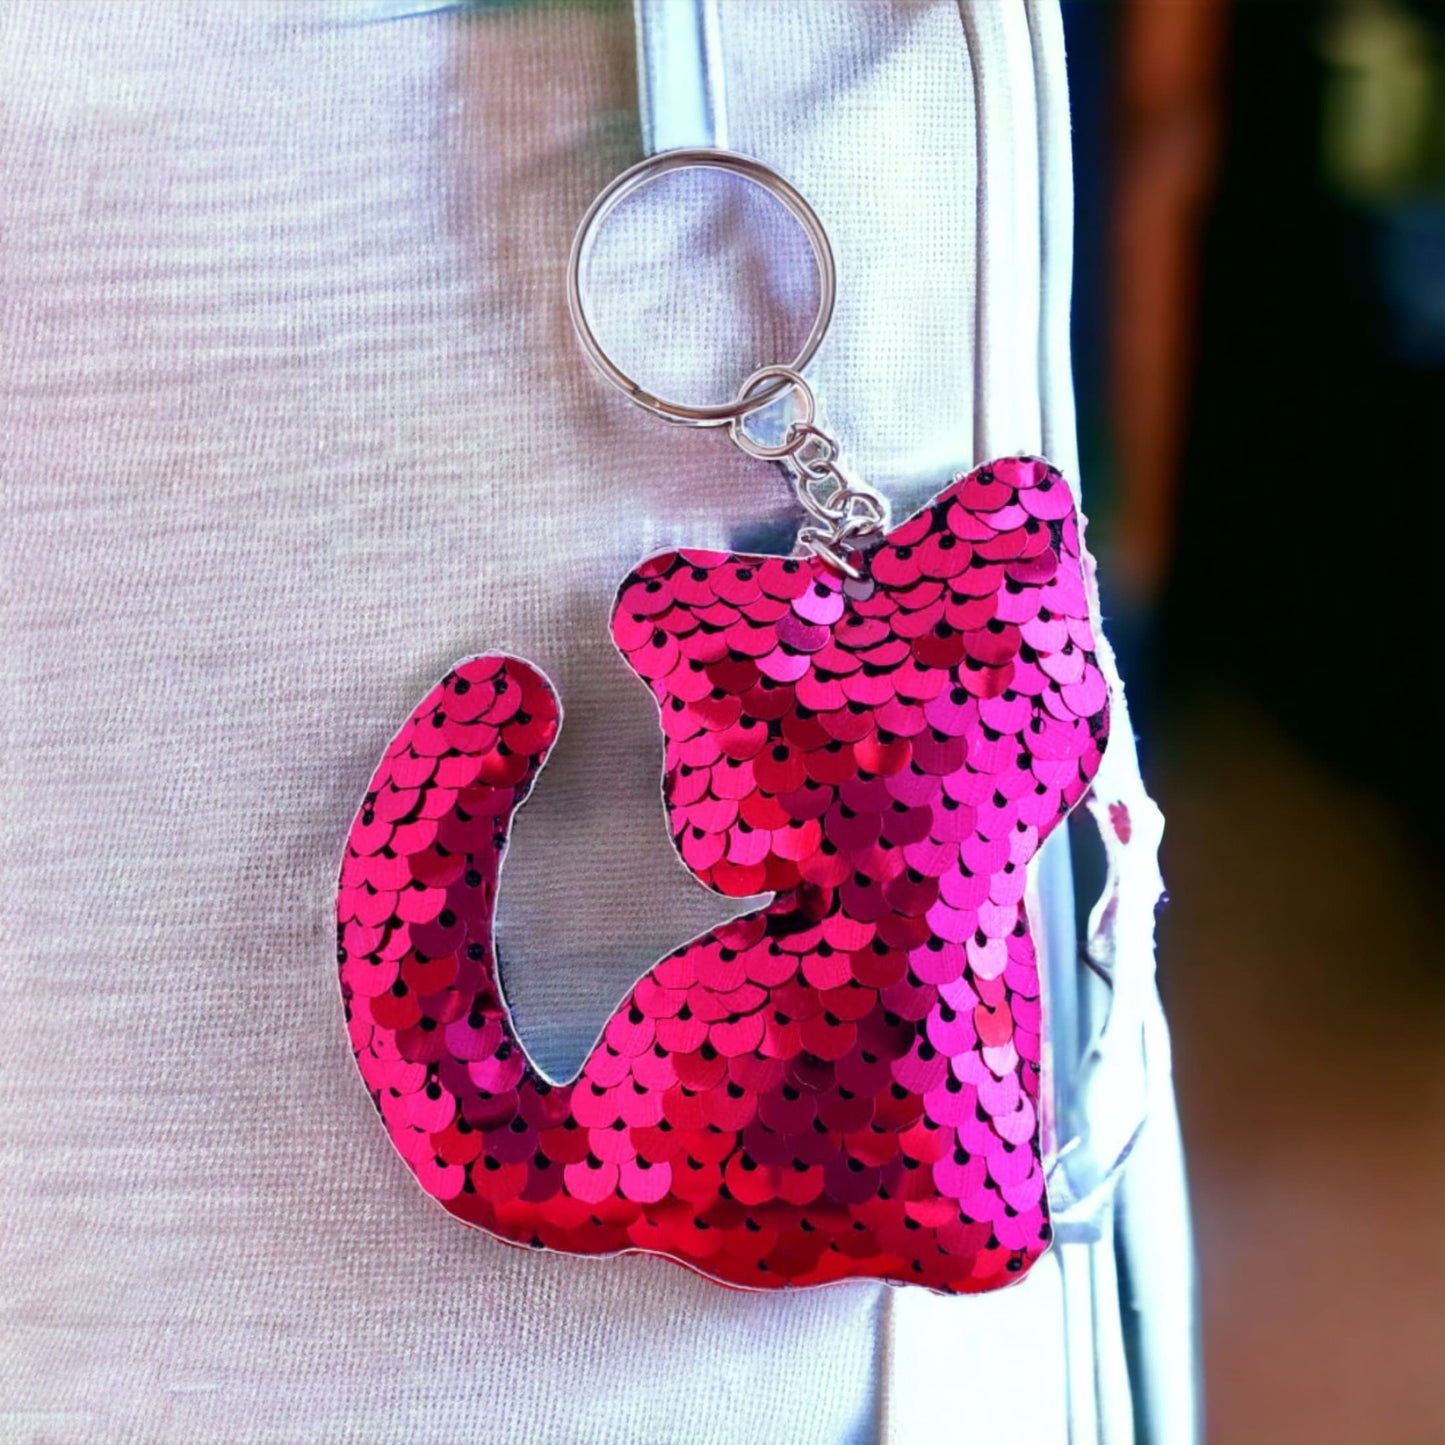 Sequin Kitty Keychain Bag Charm from Confetti Kitty, Only 2.99